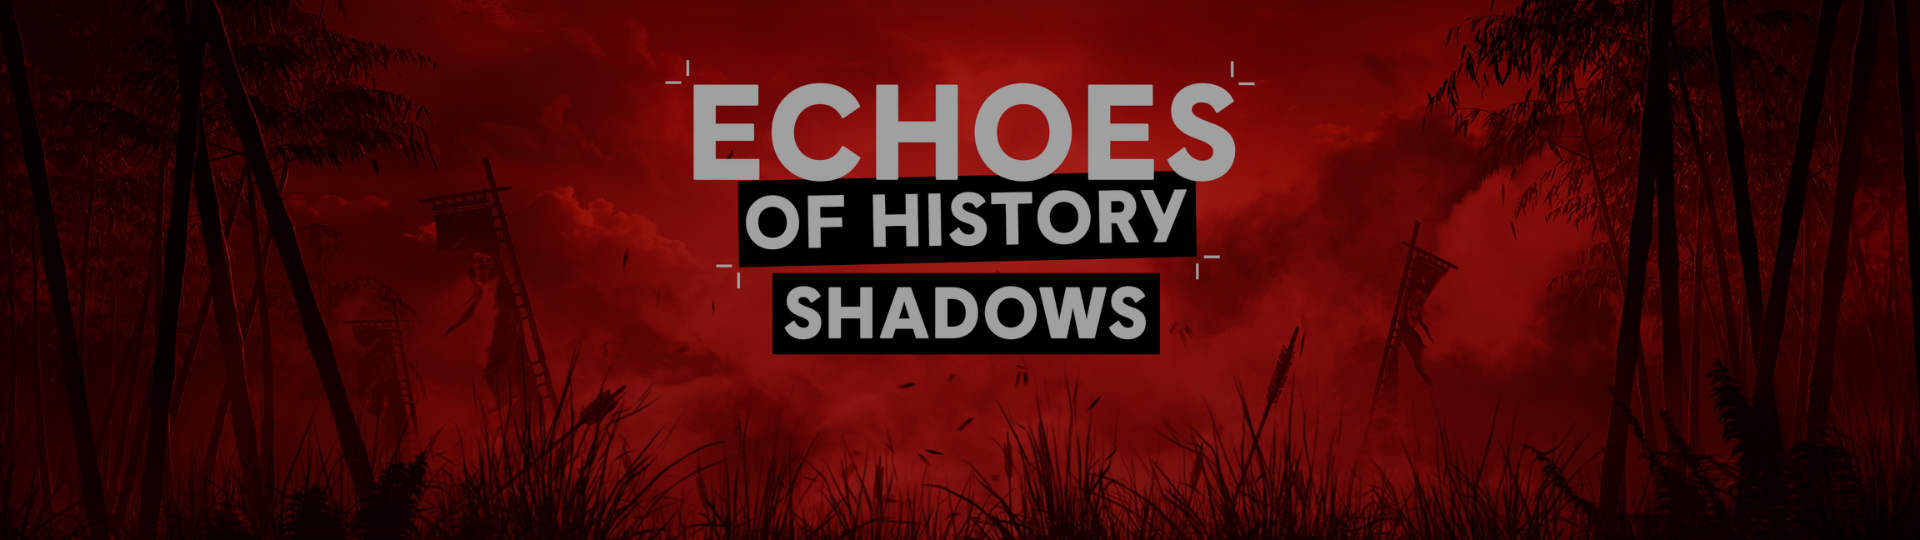 Ubisoft Podcast Echoes Of History Relaunches On The History Hit Network, With The Announcement Of Assassin’s Creed® Shadows